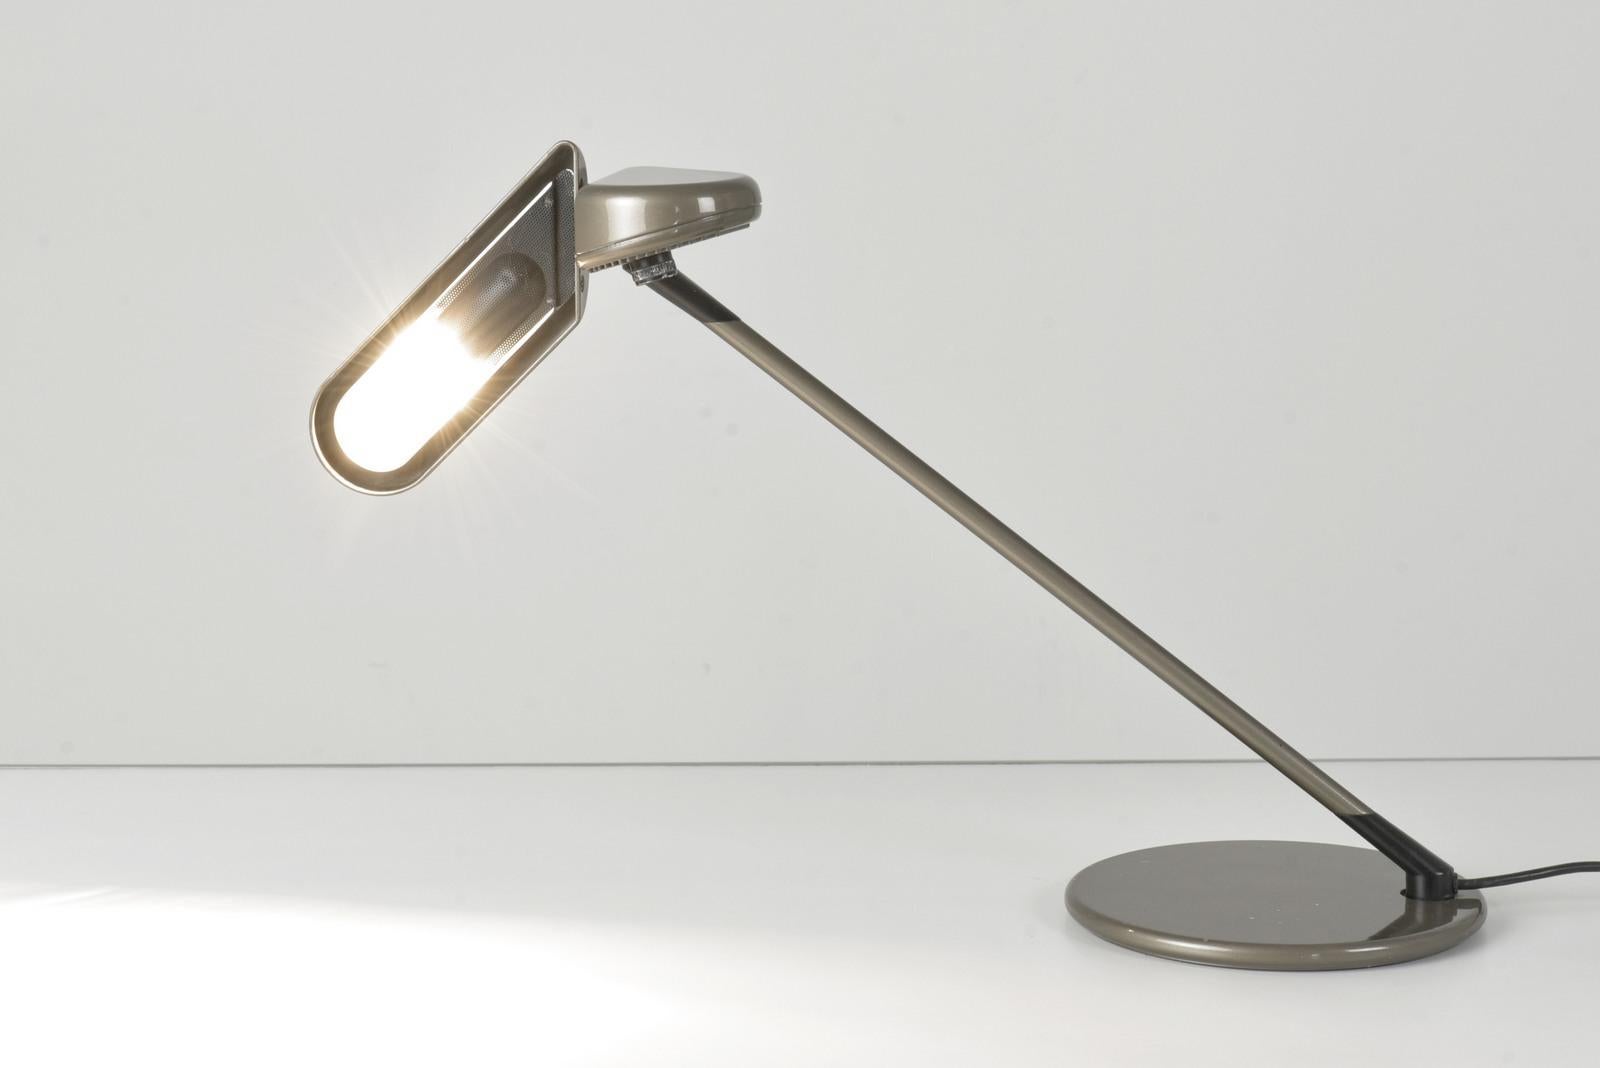 Metal Table Lamp by Bruno Geccelin for Arteluce, Italy - 1979 For Sale